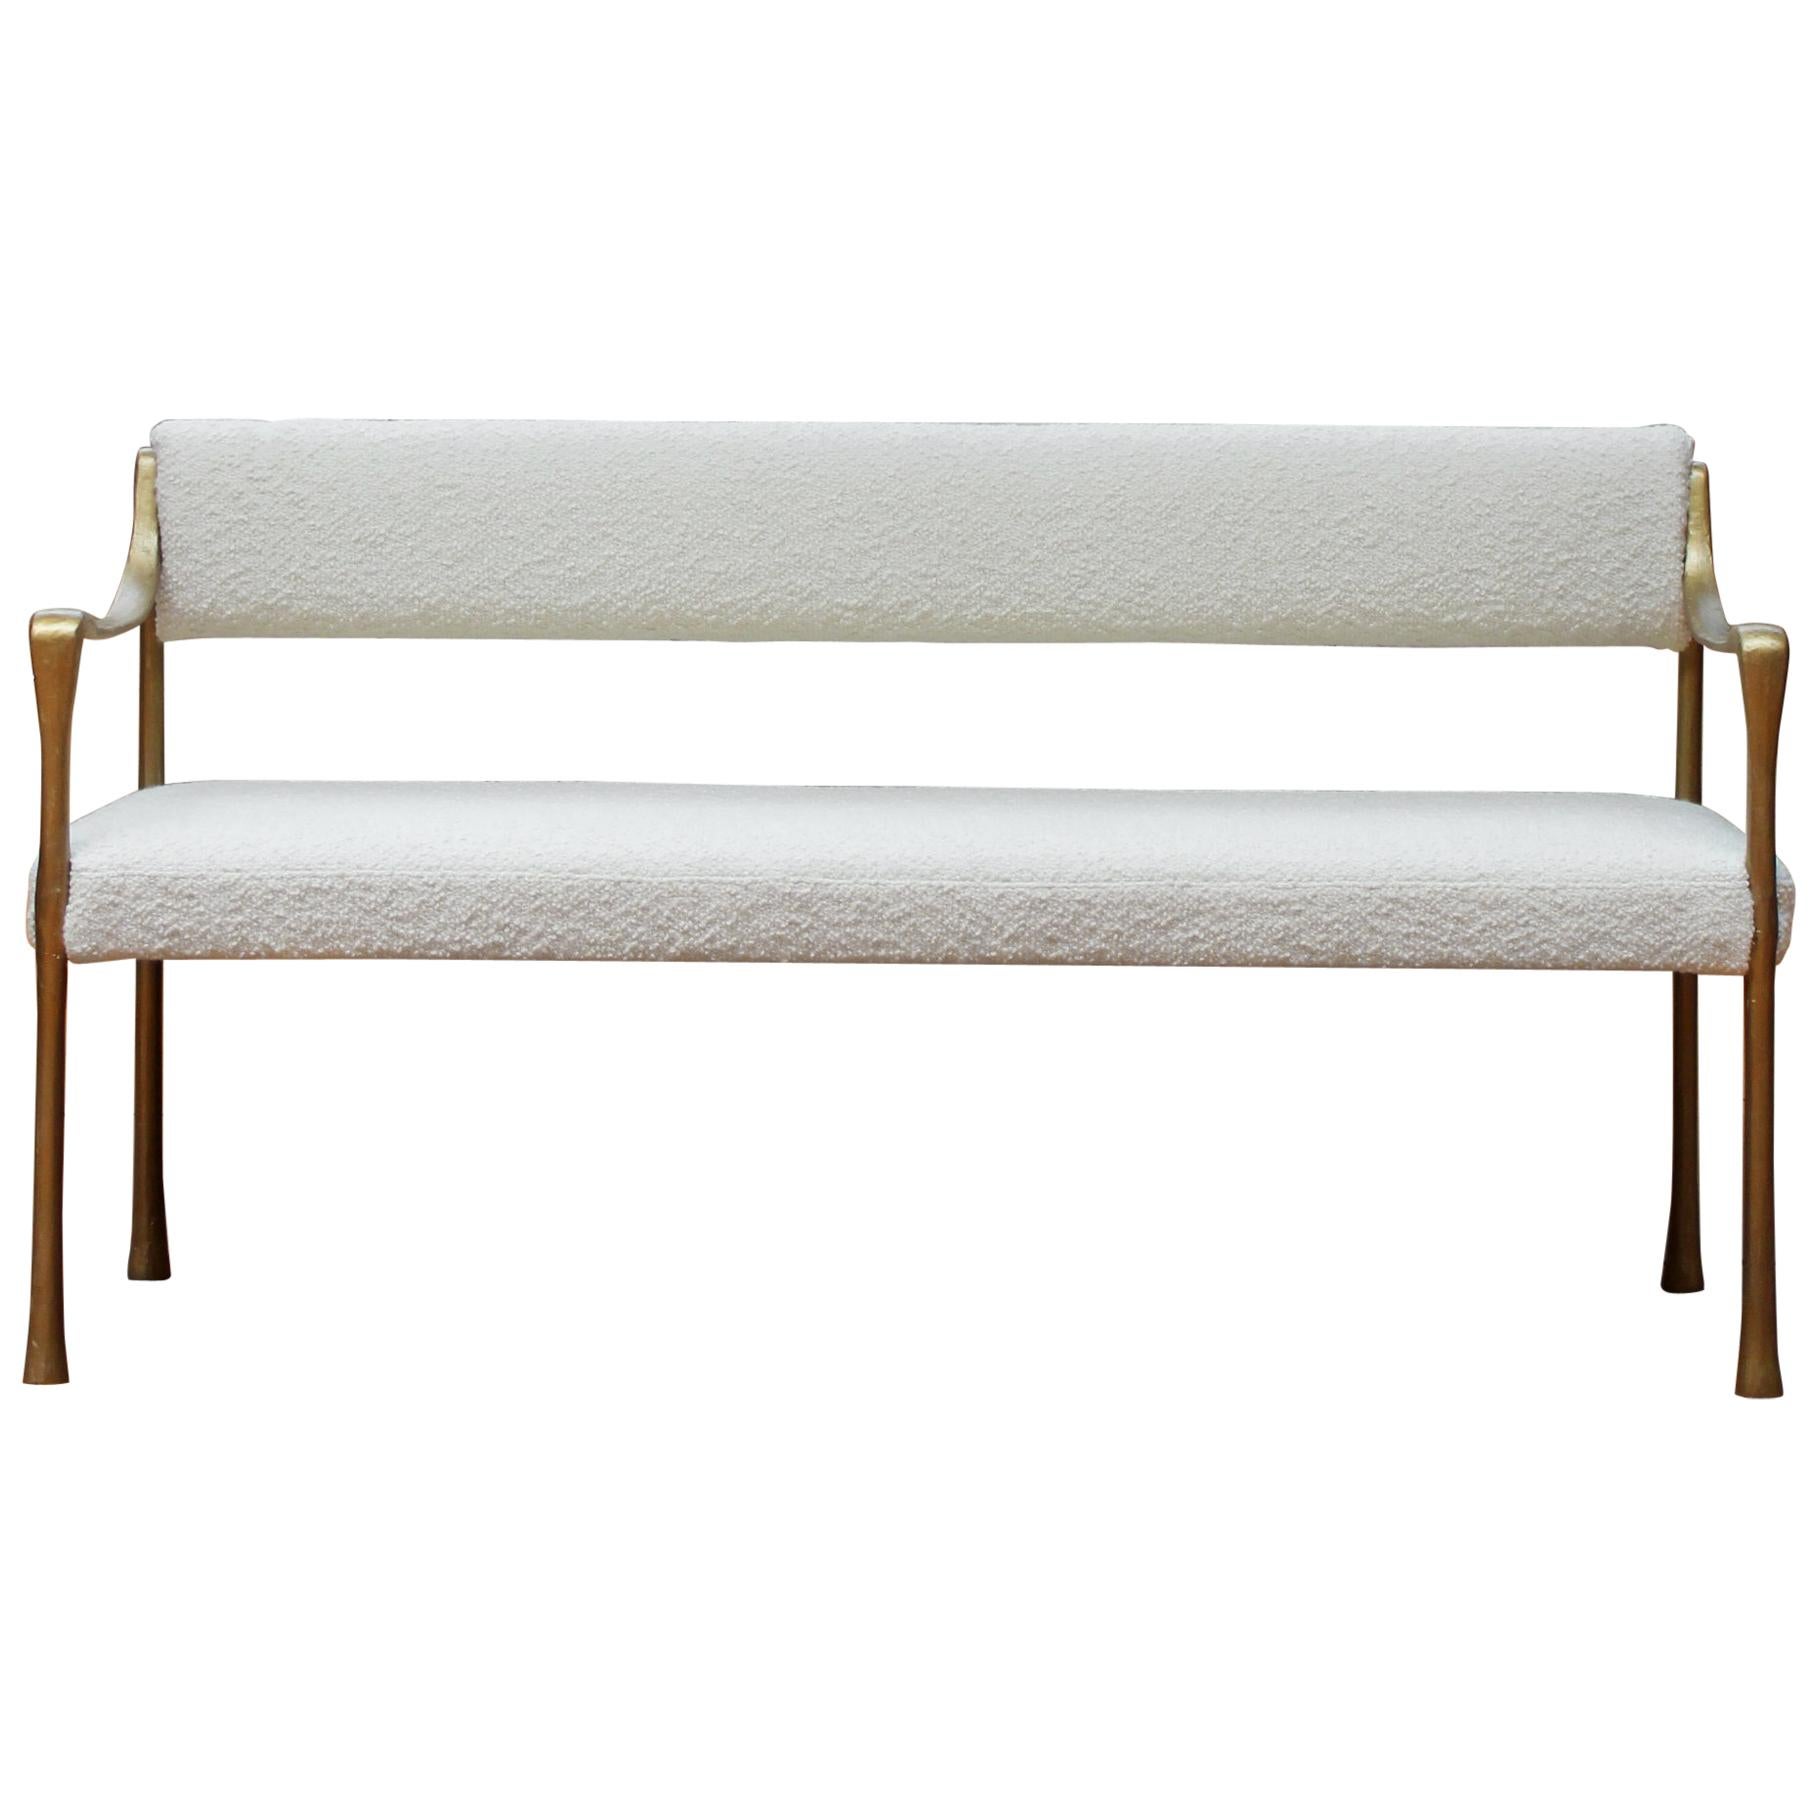 Giac Settee with Aluminium Hand-Patinated Frame Contemporary Seating For Sale